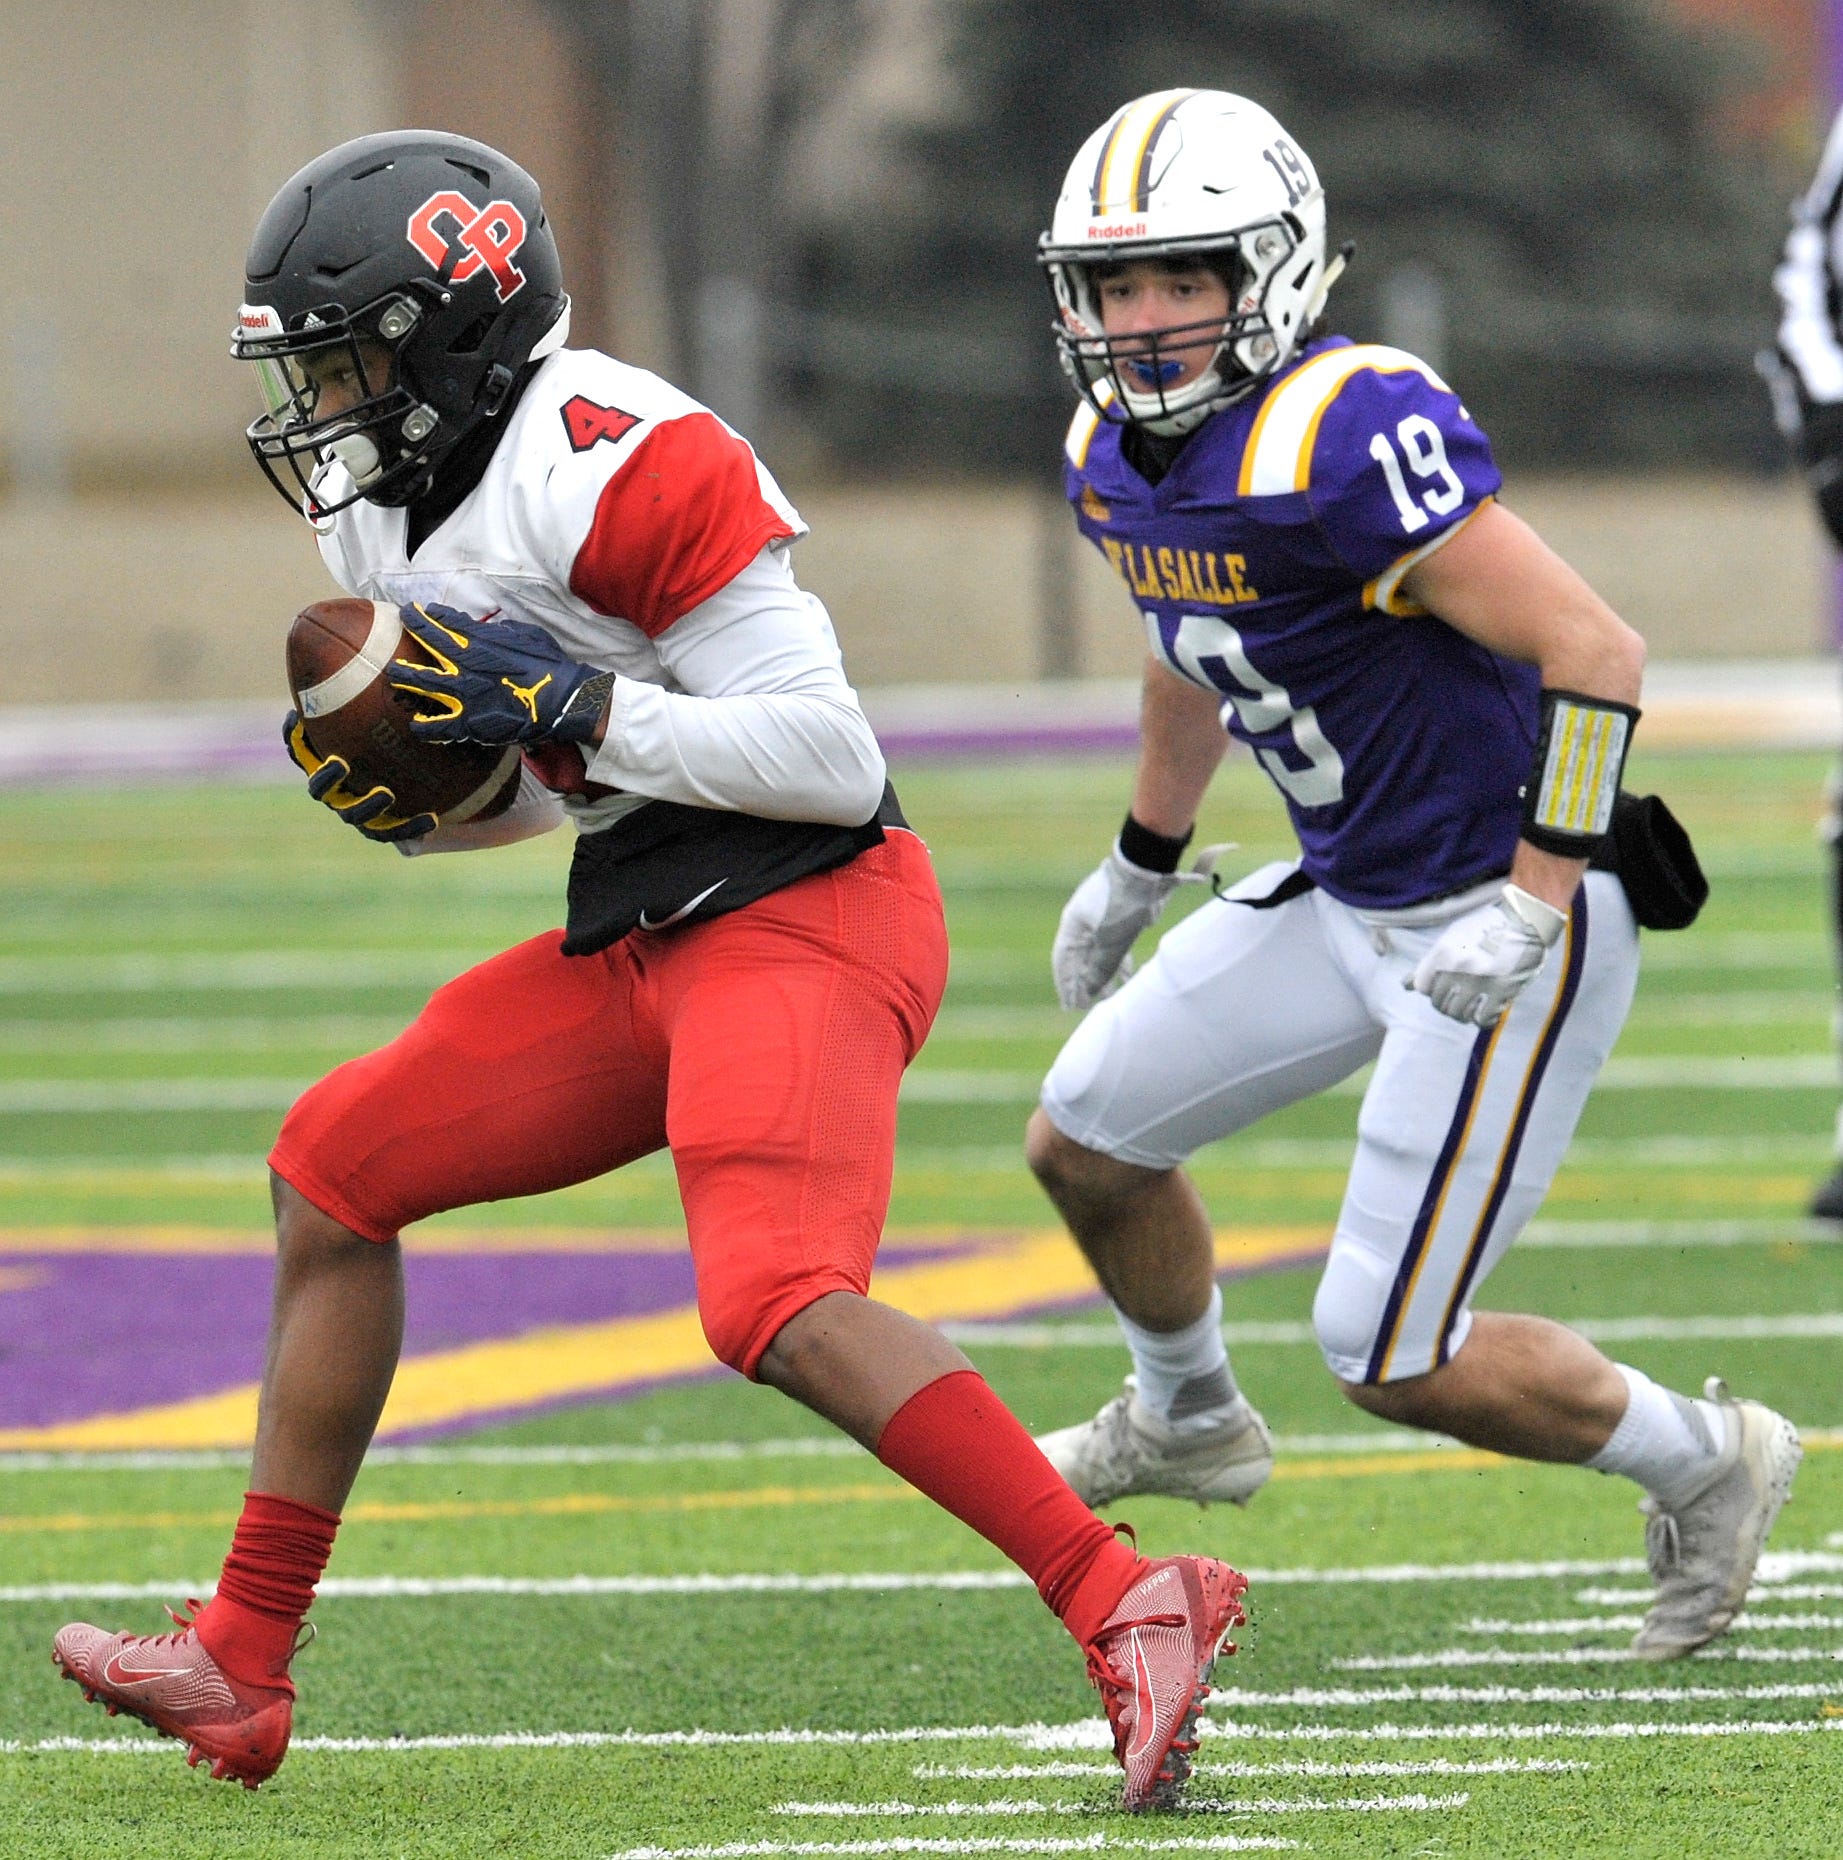 Oak Park's Amari Harris (4) receives the ball that is called back due to a false start as De La Salle's JC Ford (19) closes in to make the tackle in the first quarter.